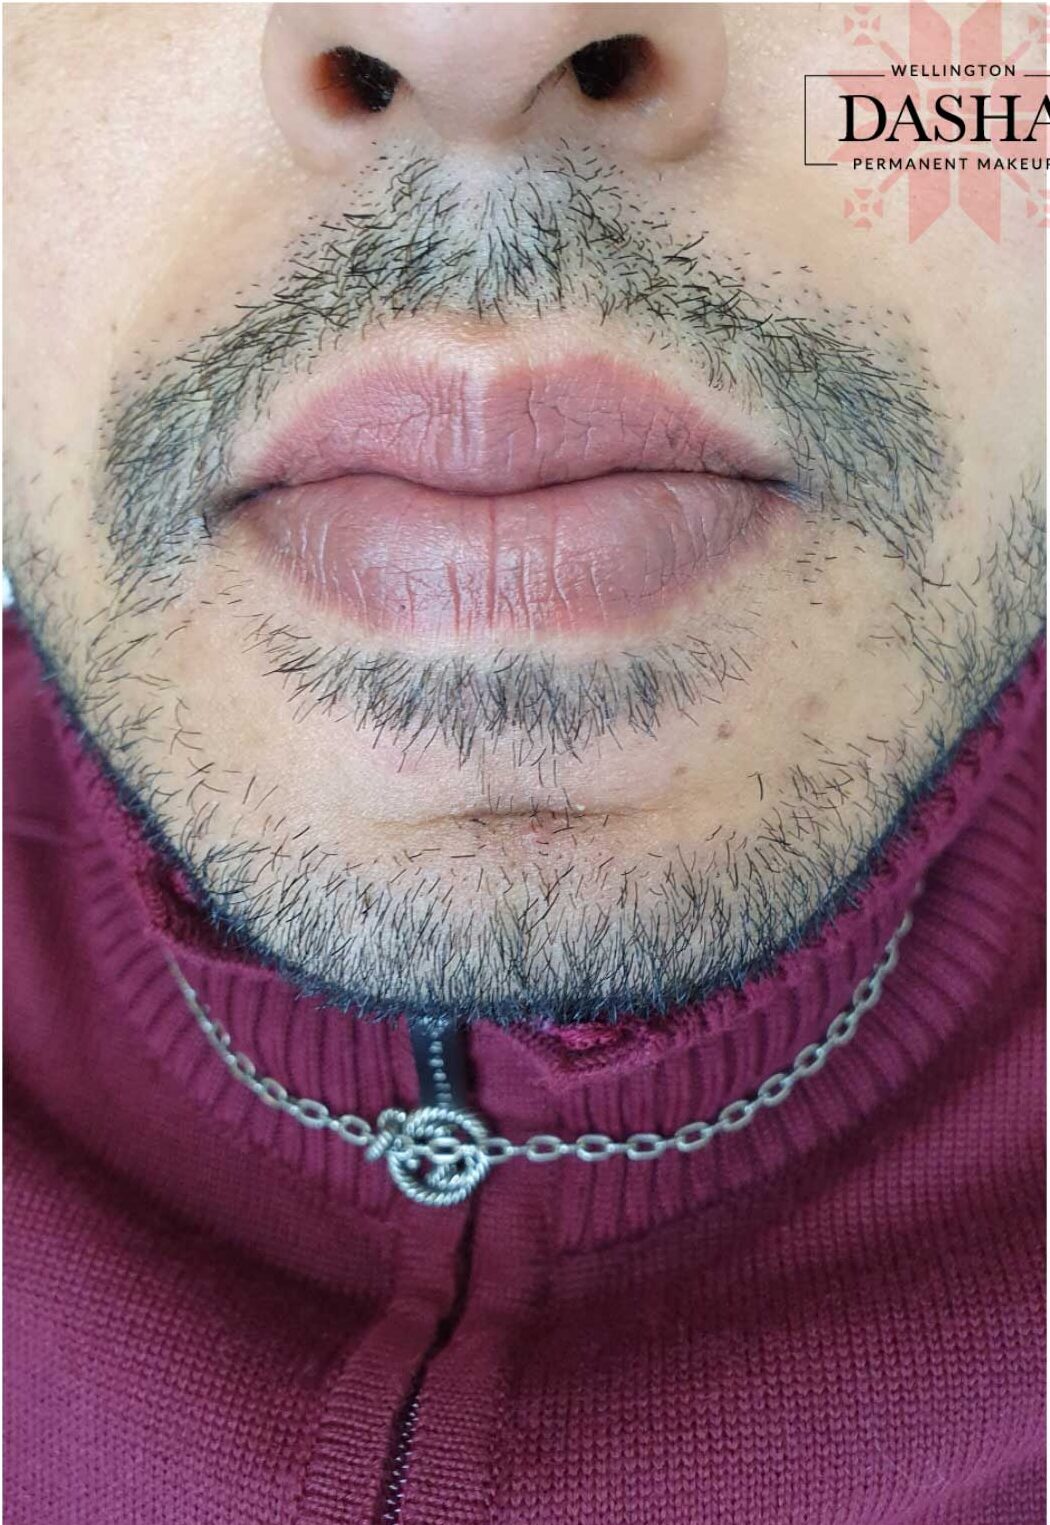 Dark Lip Neutralization. Cosmetic and Mediical Tattoo by Dasha. Permanent makeup and reconstructive tattoo, scalp micro-pigmentation in Christchurch, New Zealand